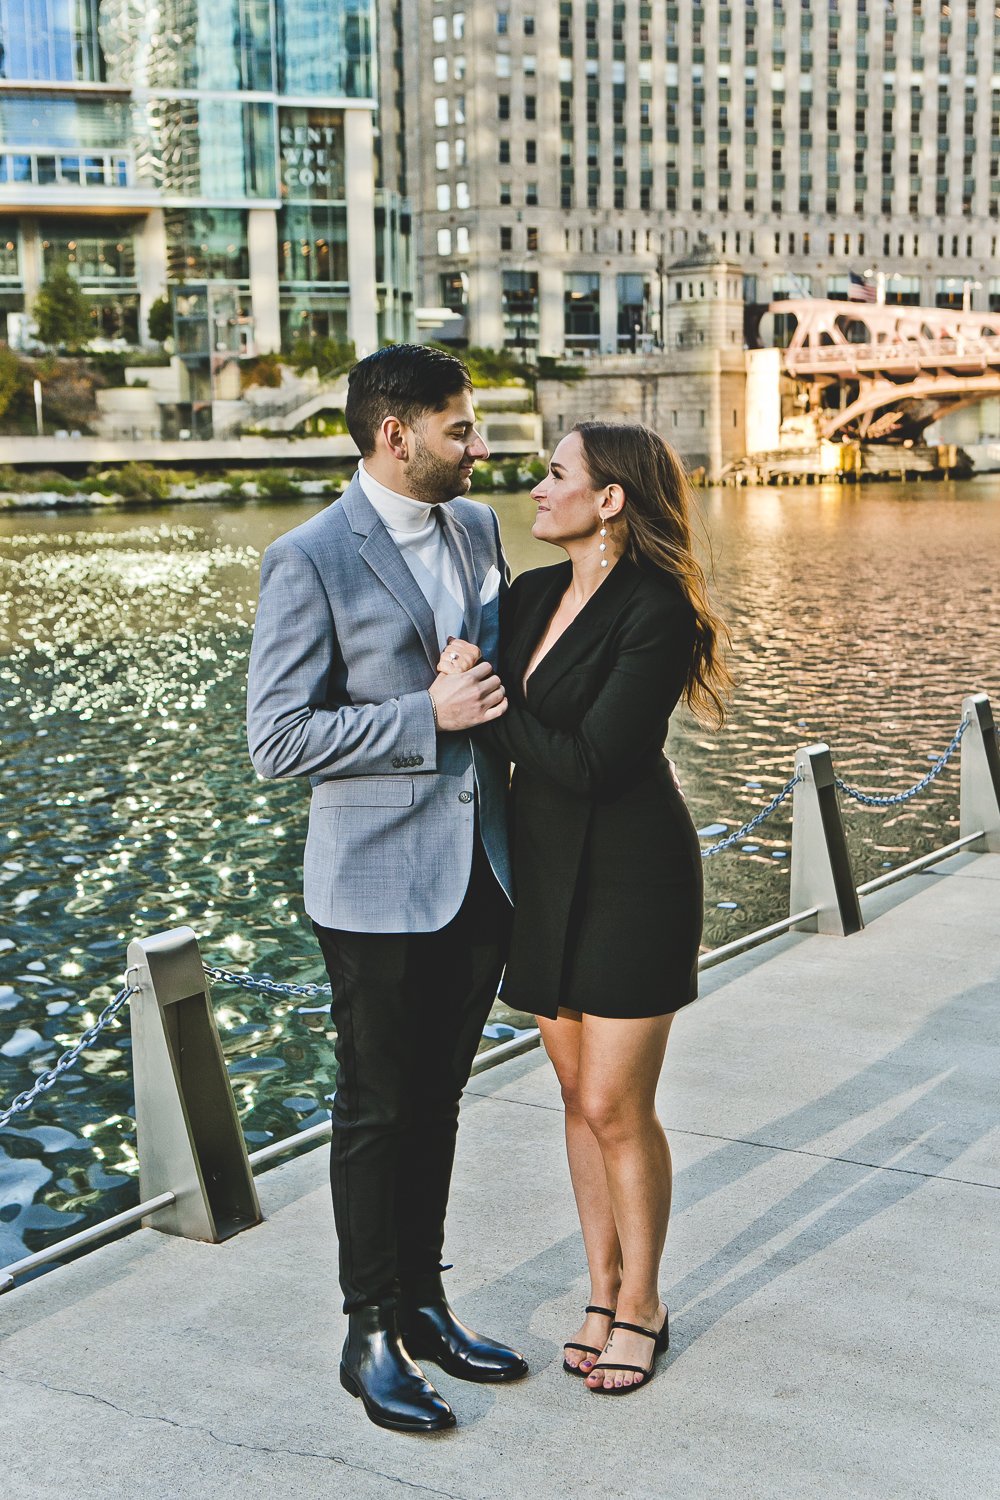 Downtown Chicago Engagement Session_JPP Studios_TaylorKlaus_09.JPG